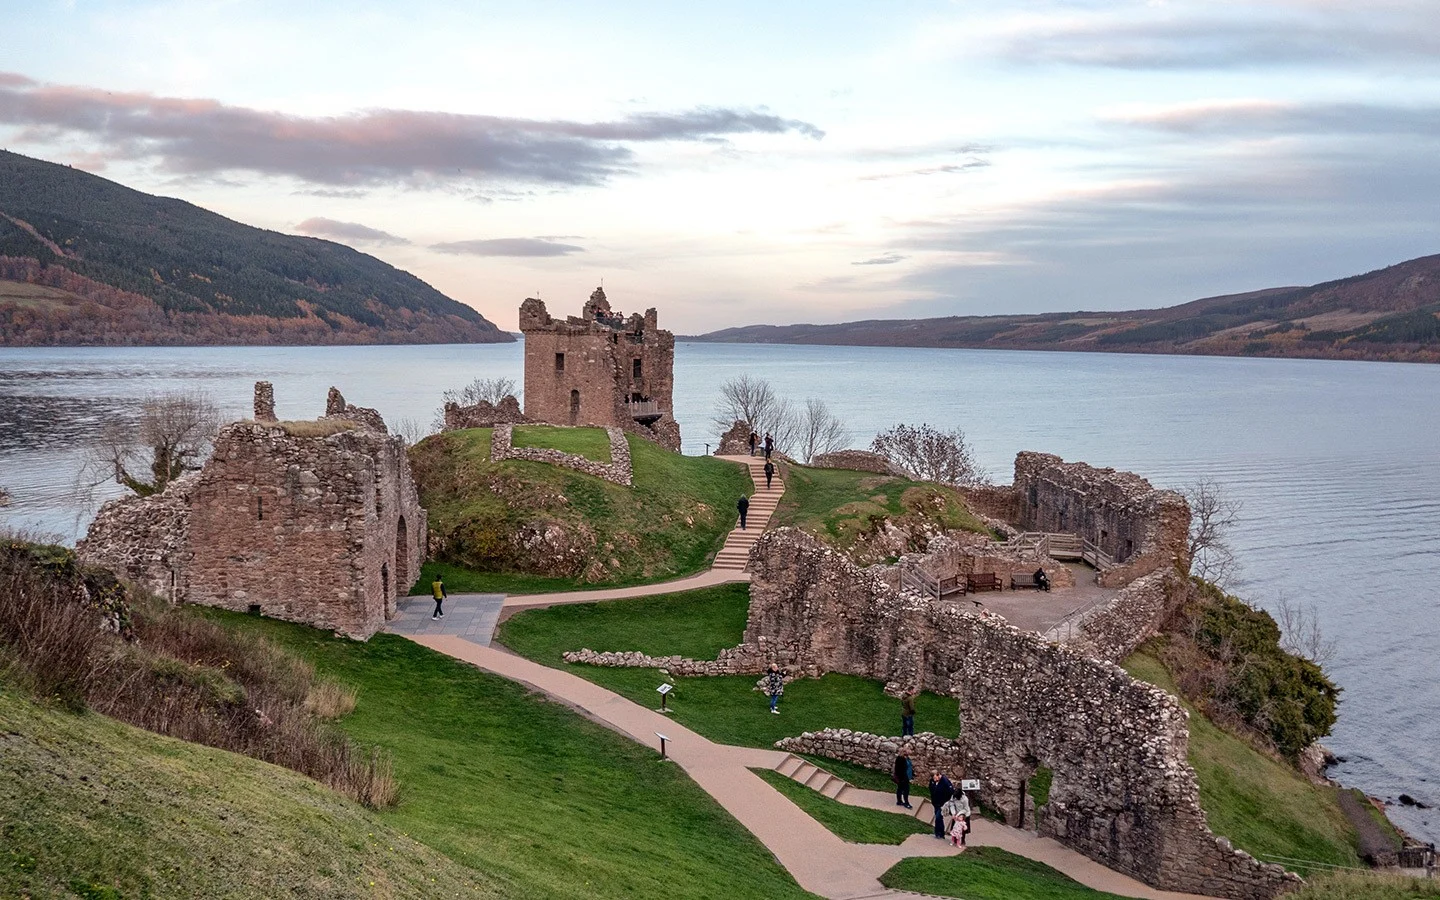 Sunset at Urquhart Castle by Loch Ness